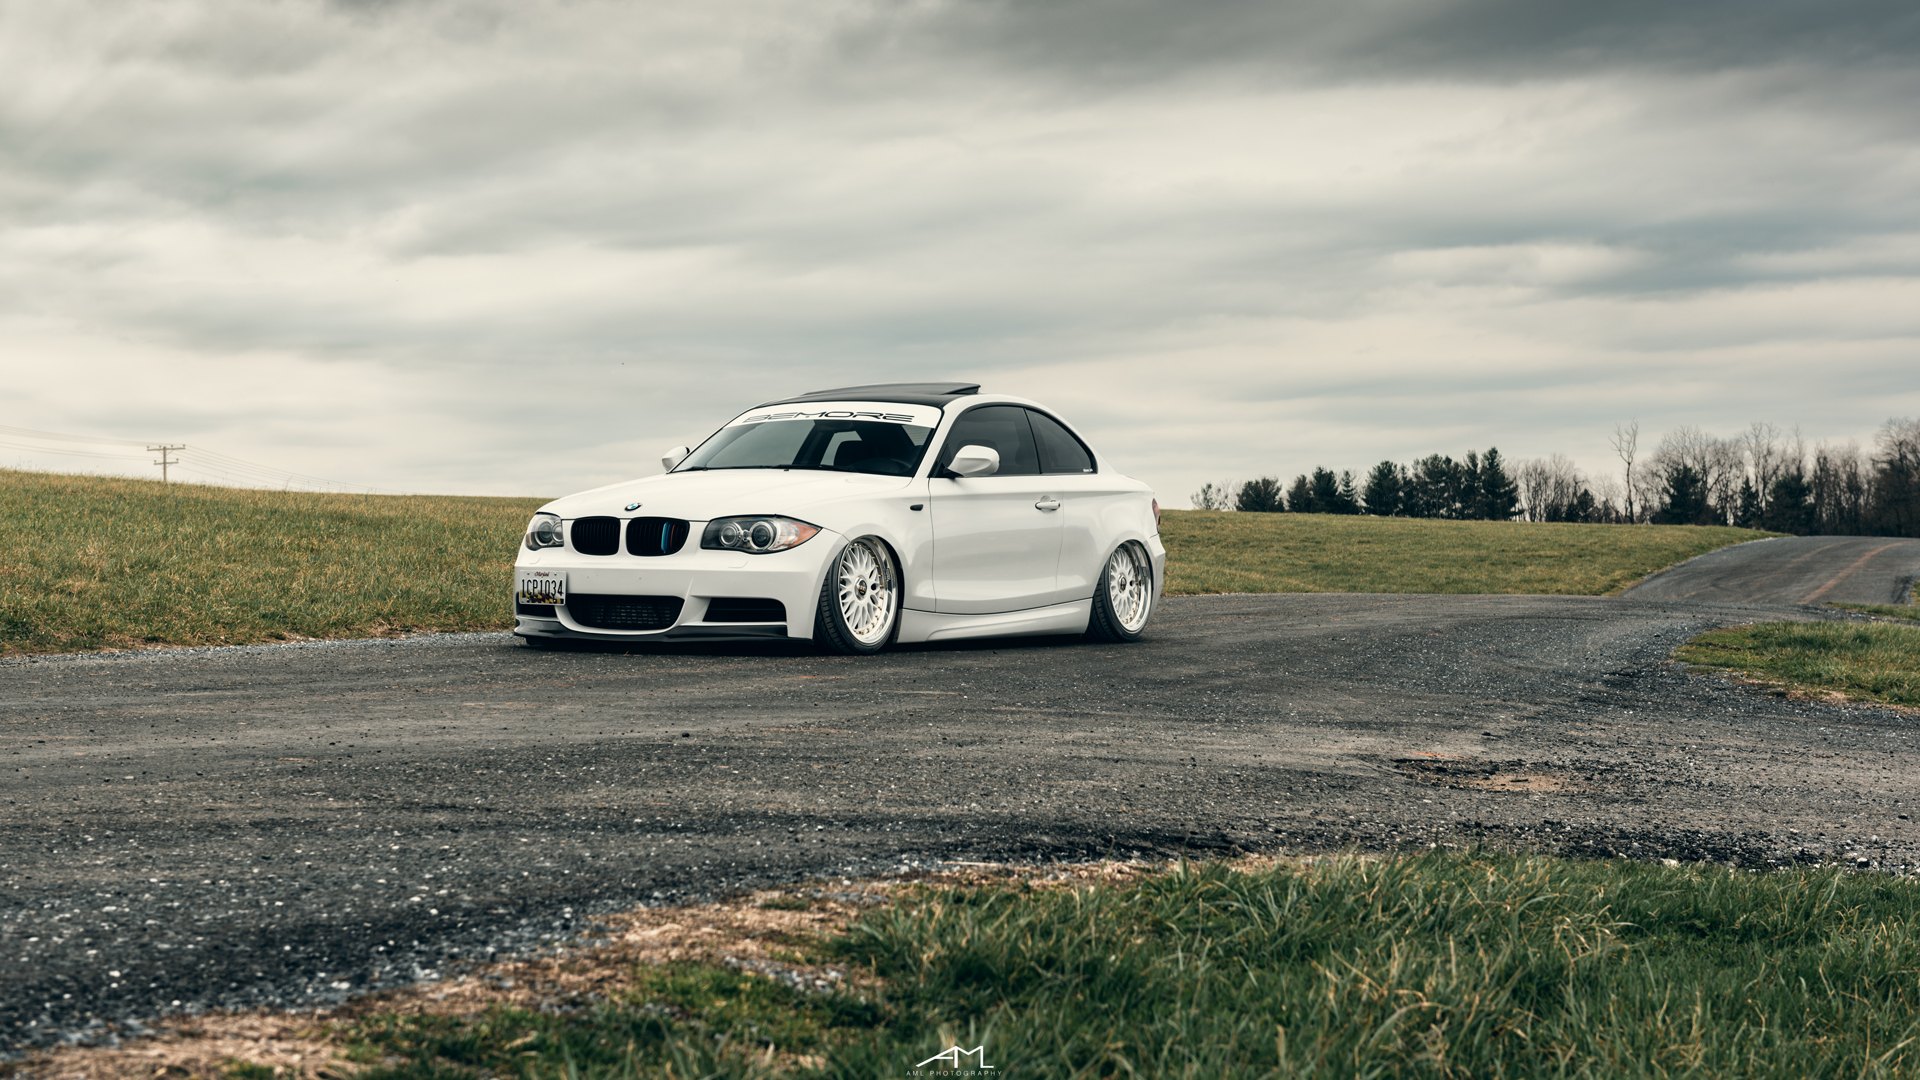 White Lowered BMW 1-Series with Custom Wheels - Photo by Arlen Liverman